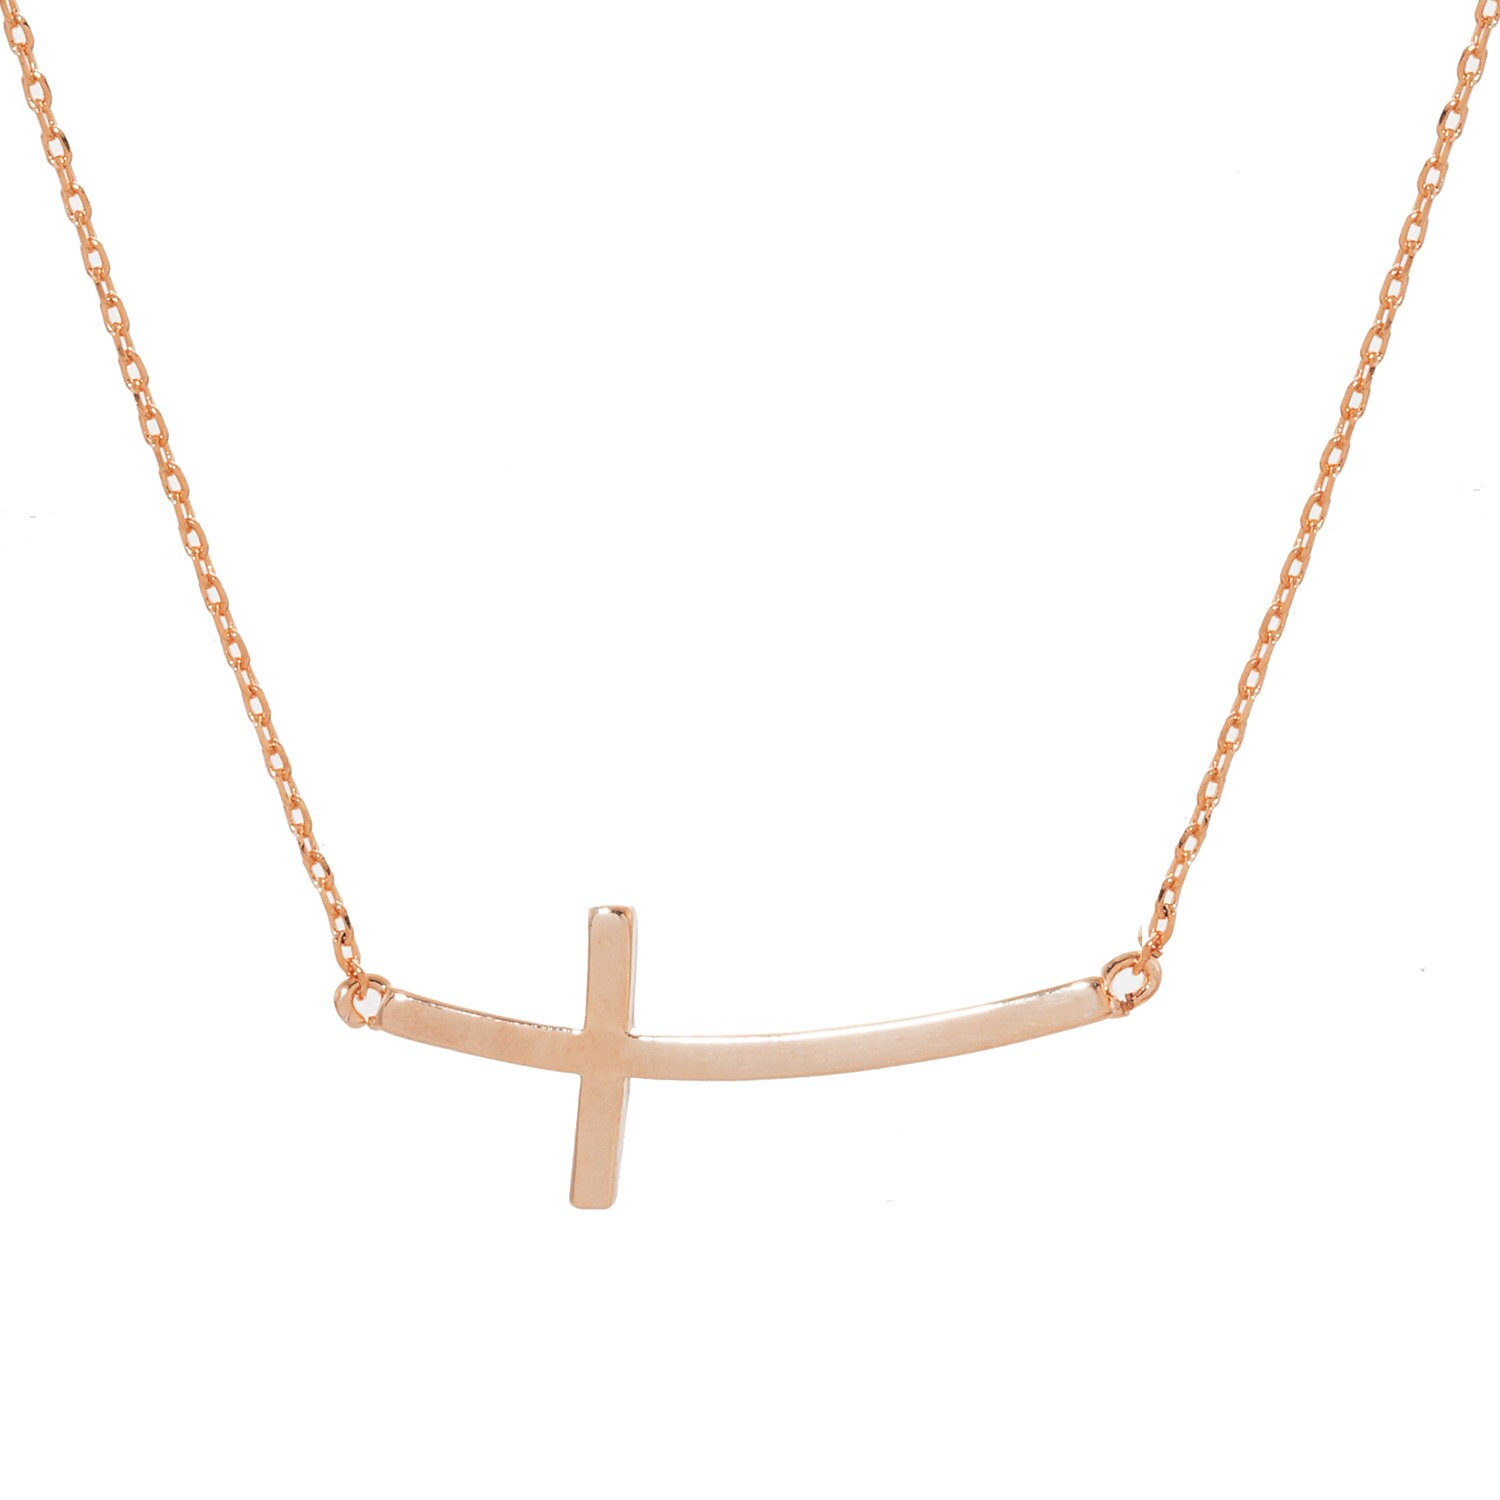 Tiny Cross Necklace Curved Cross Necklace Gold Cross - Etsy